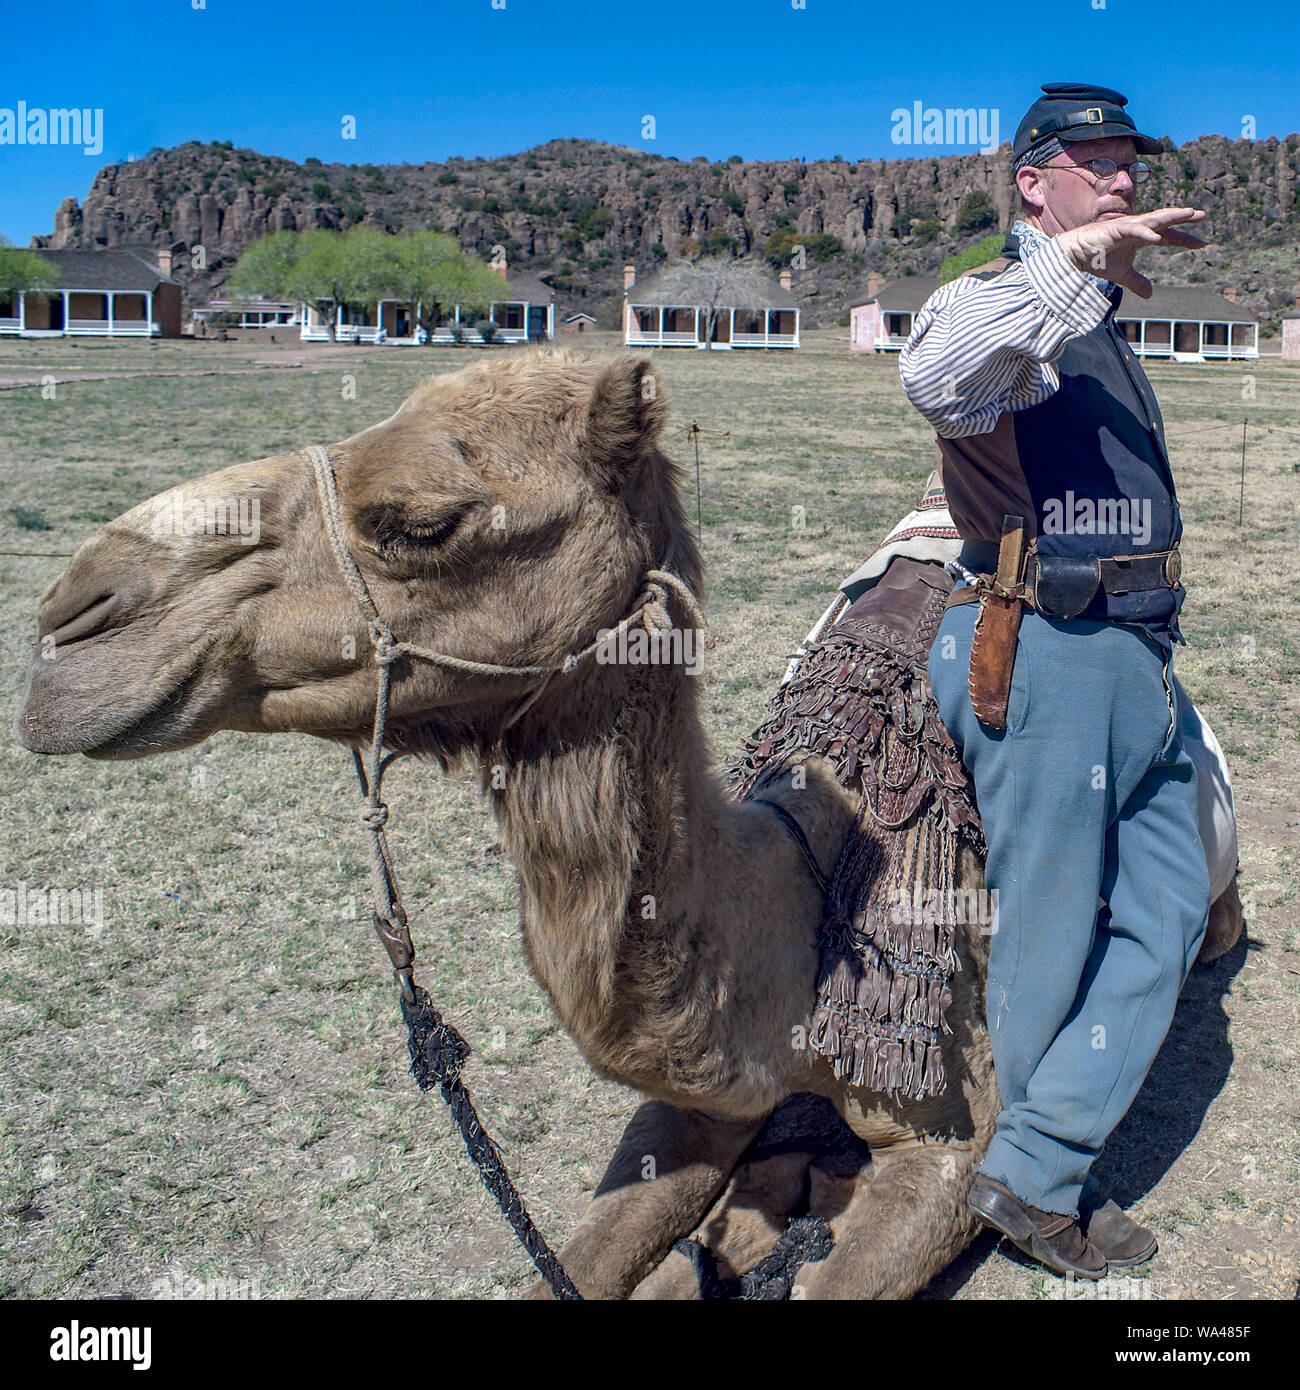 United States Camel Corps reenactor in Fort Davis, Texas. It was a 19th-century experiment by the United States Army in using camels as pack animals. Stock Photo